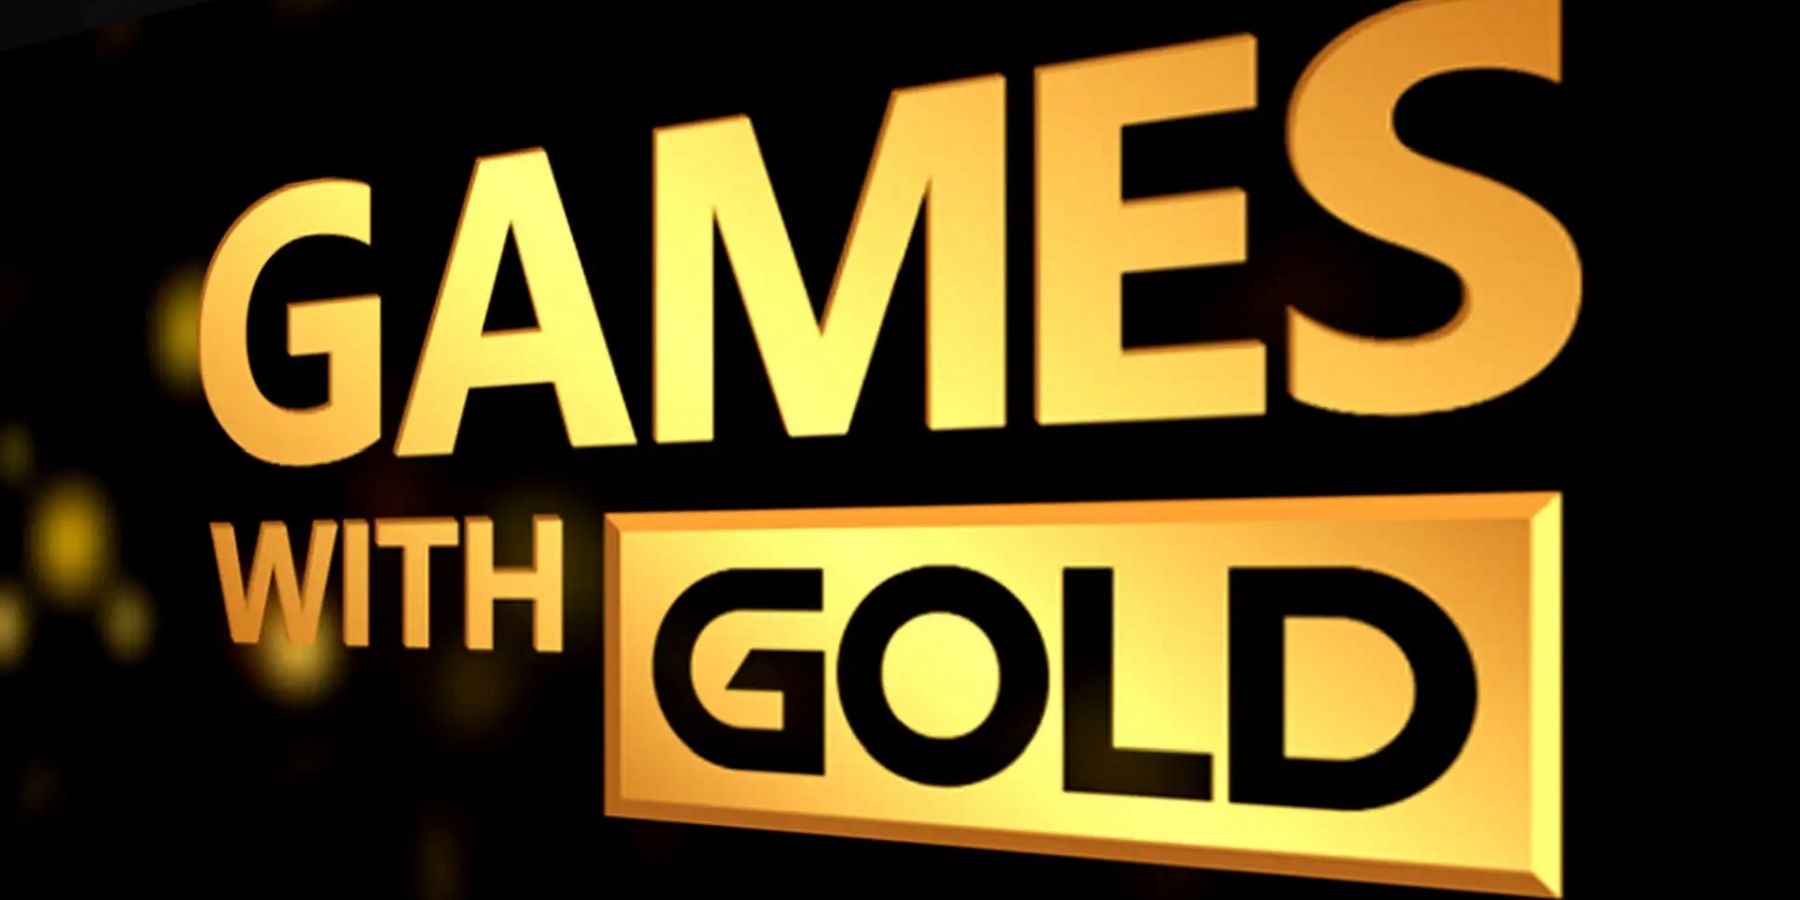 Xbox Games with Gold for August: What are the Xbox Live Gold games this  month?